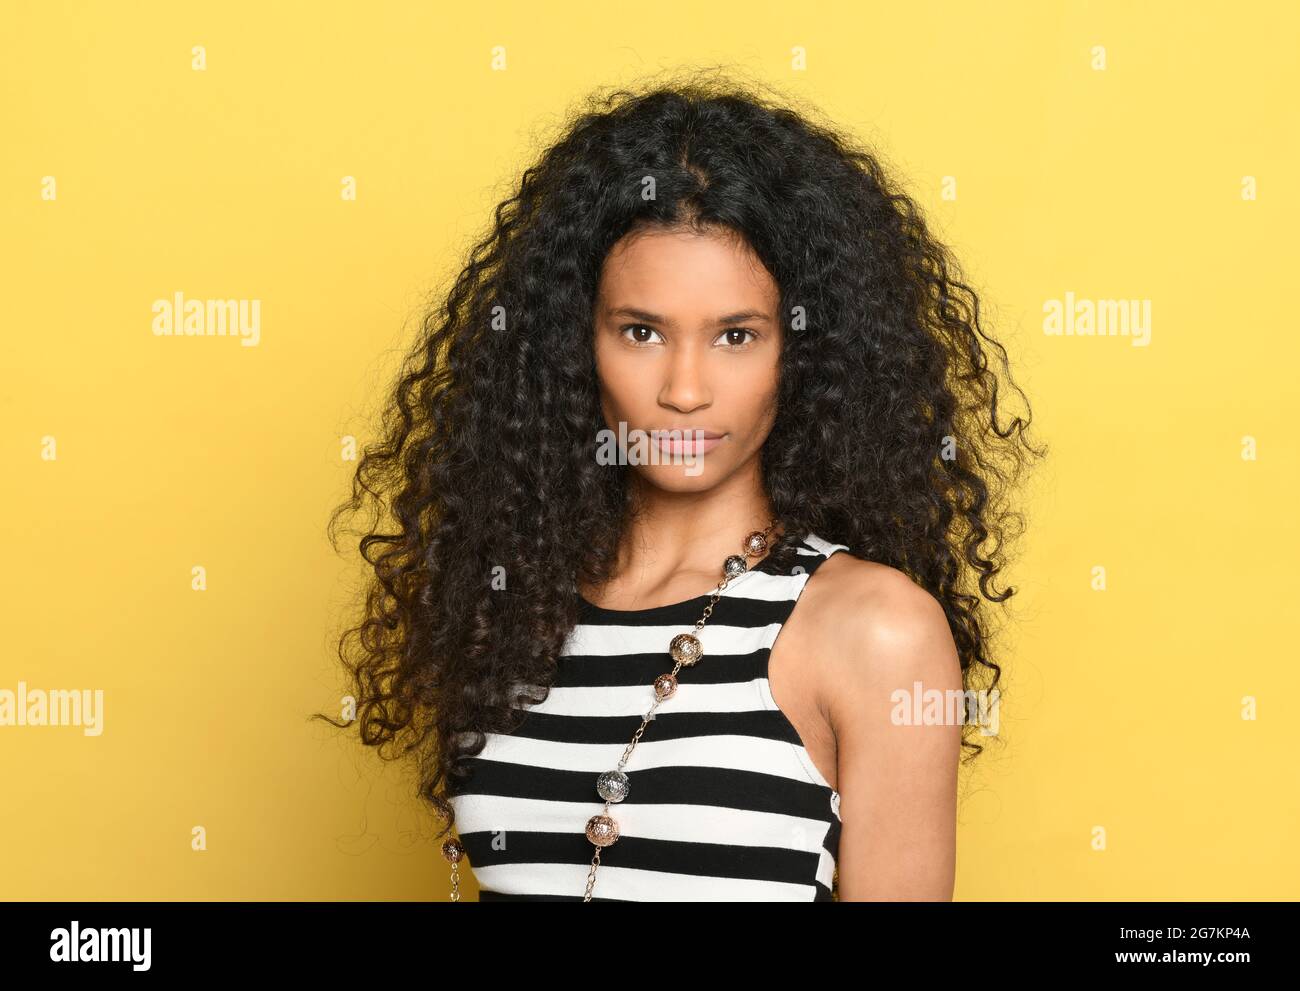 Beautiful black woman with gorgeous curly long hair posing over a yellow background looking at camera with a serious expression Stock Photo